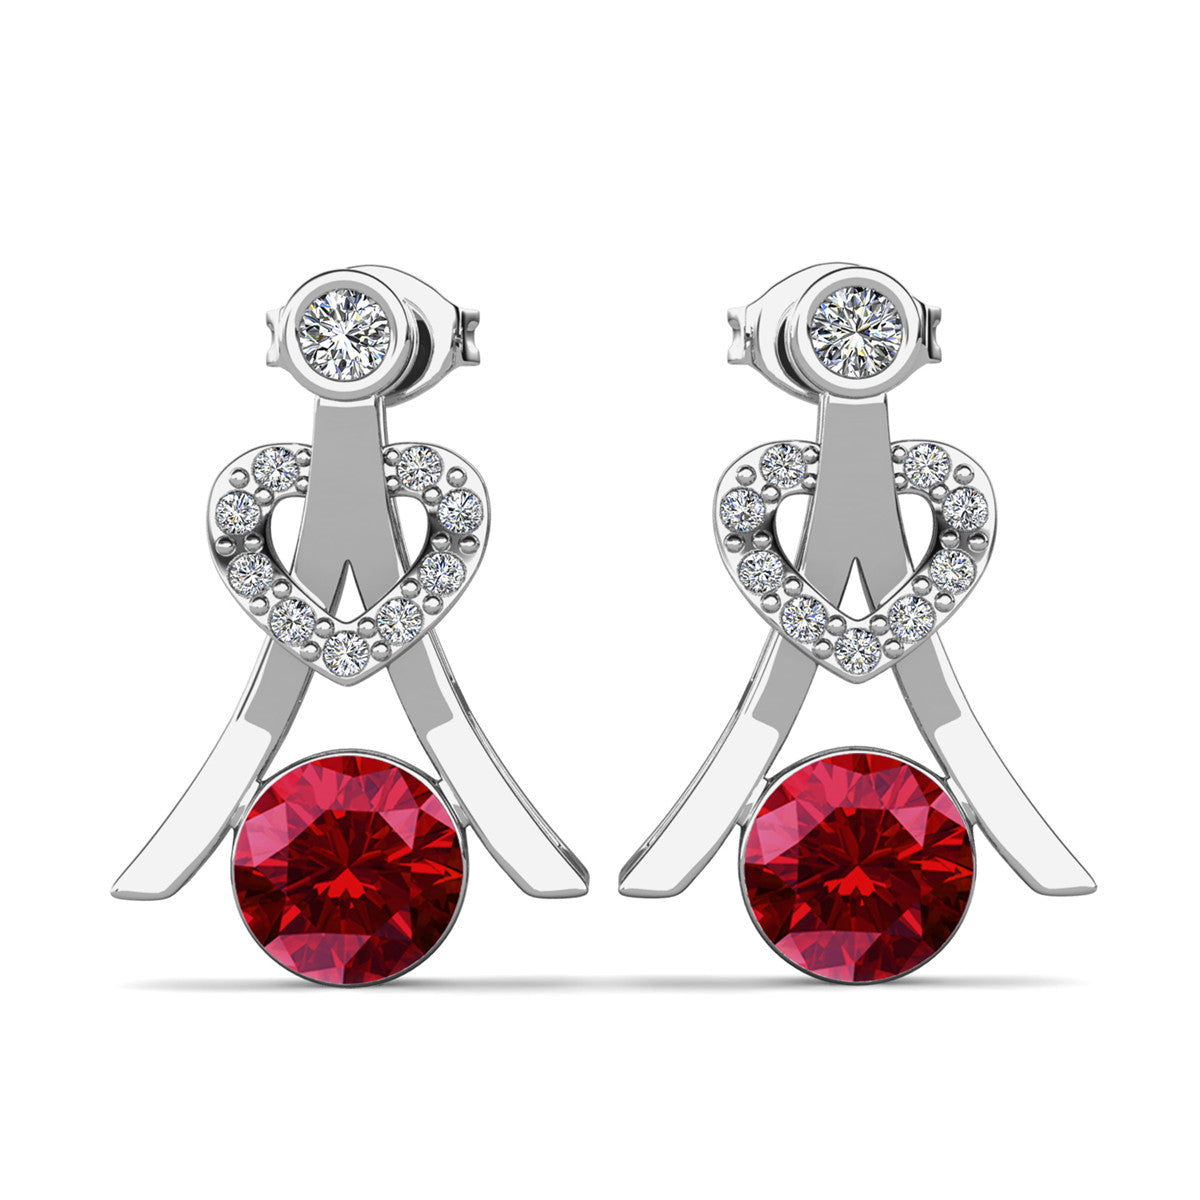 Serenity January Birthstone Garnet Earrings, 18k White Gold Plated Silver Earrings with Round Cut Crystals